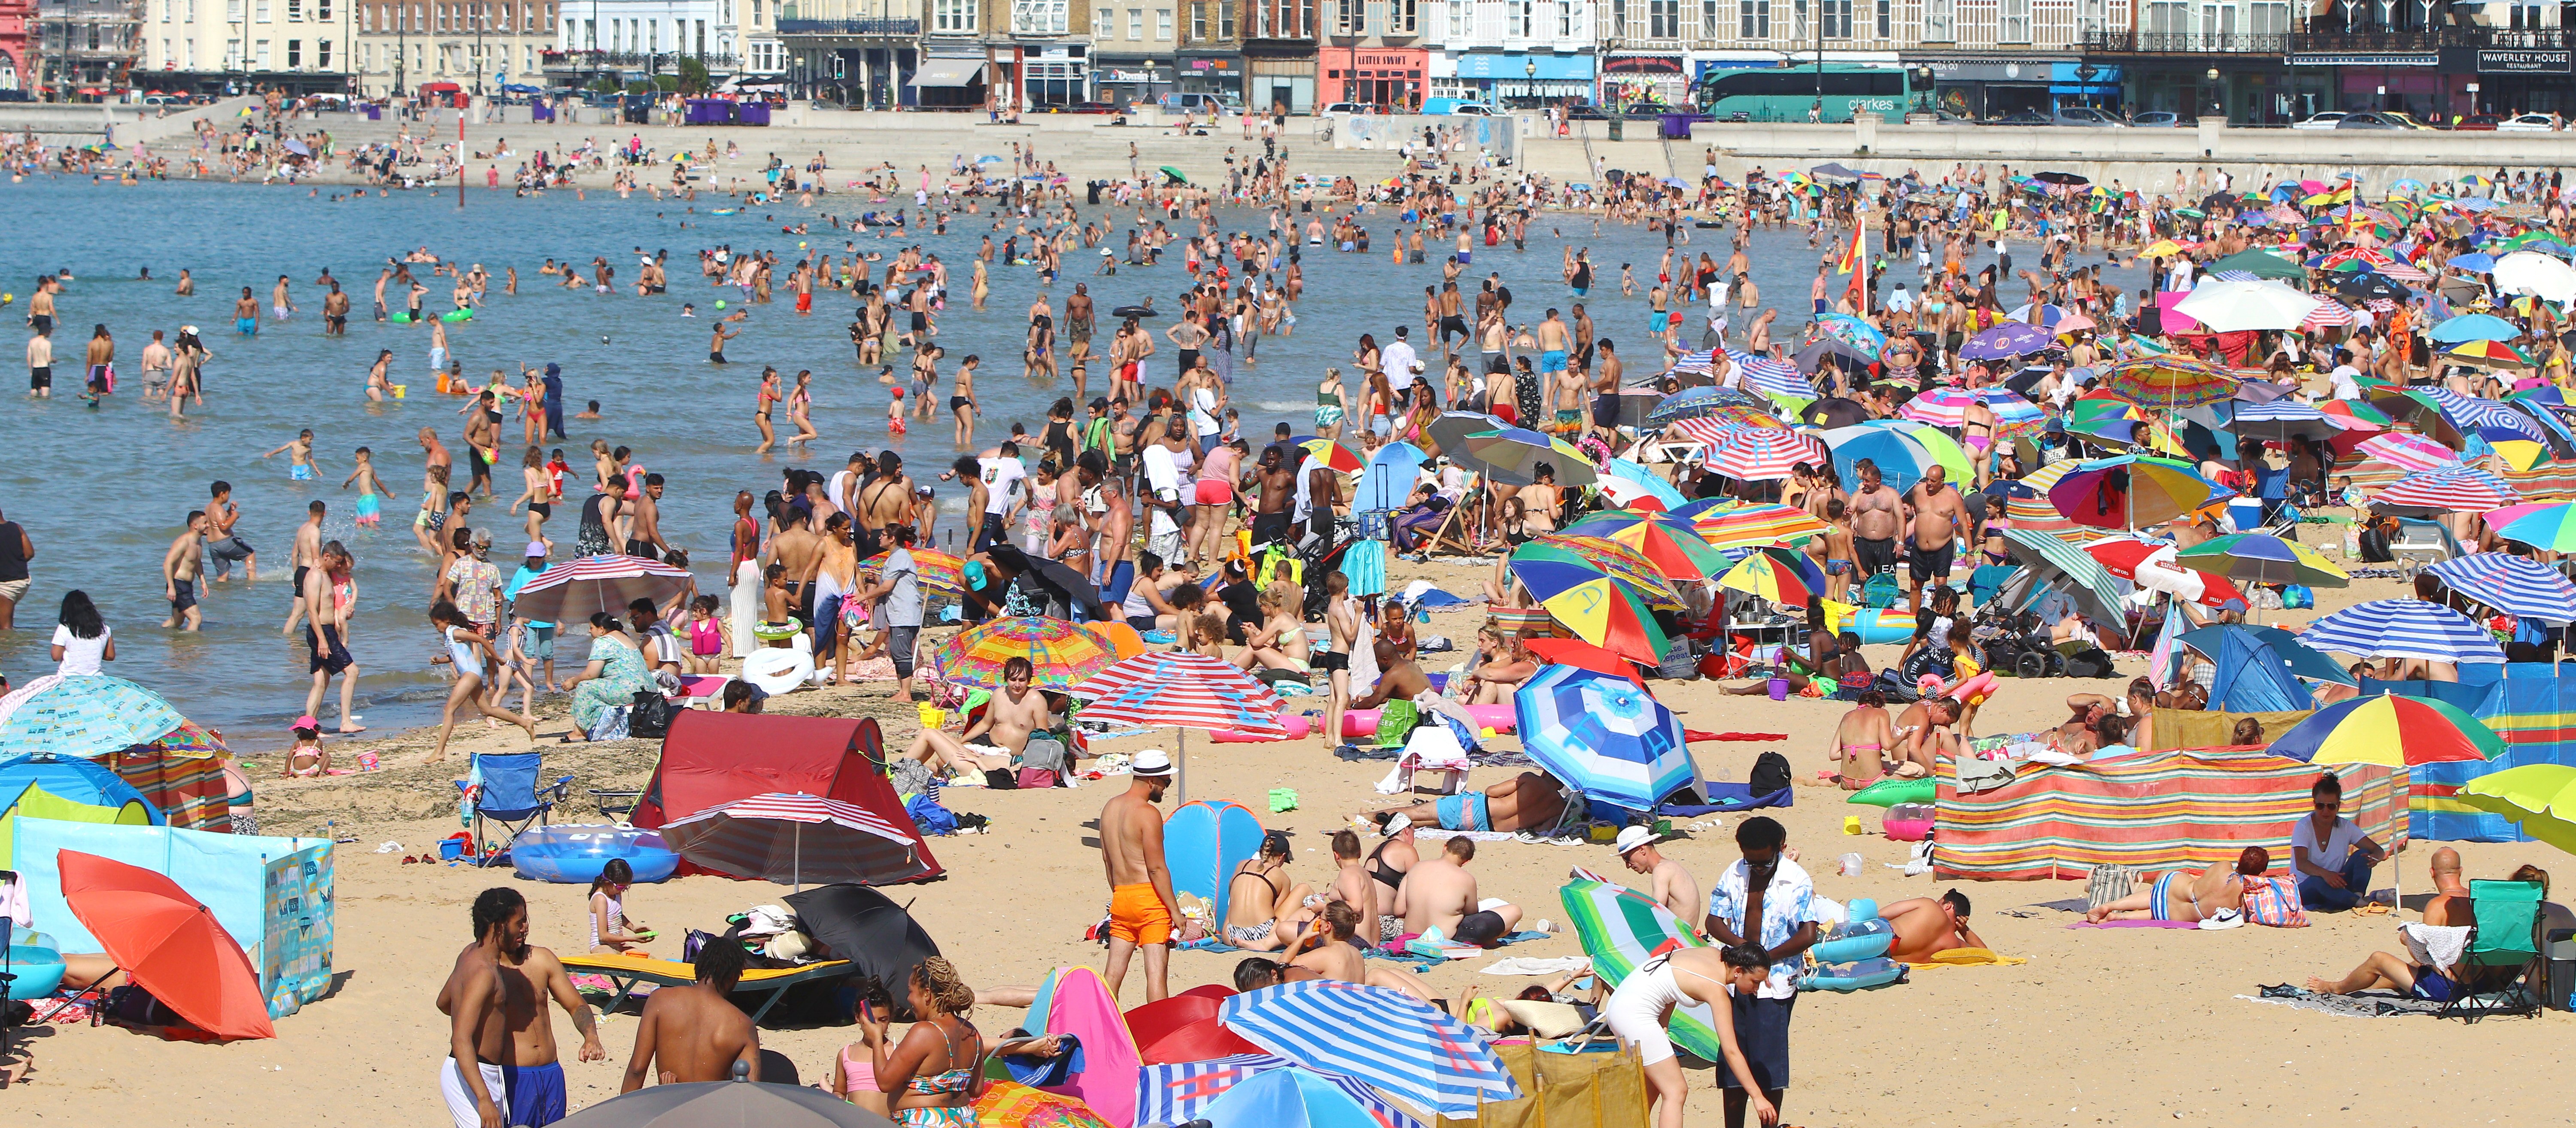 Credit: Funk Dooby, Margate Beach, England, in July 2022 during the heatwave.